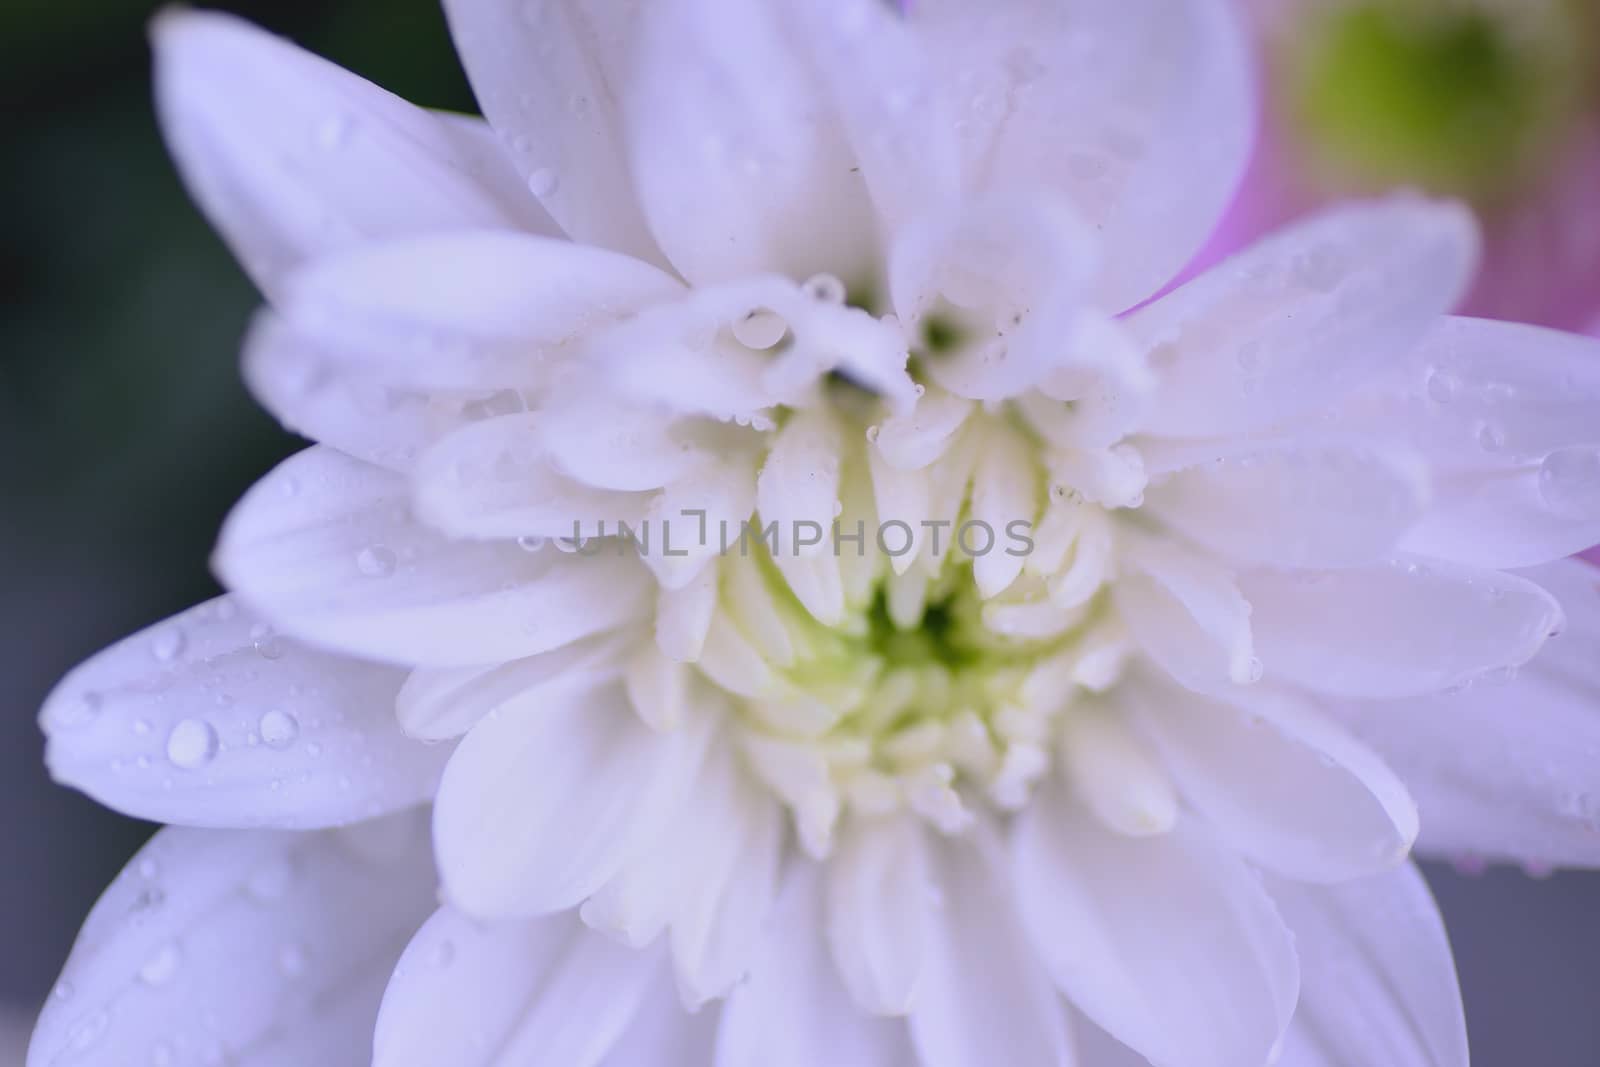 Macro details of white Dahlia flower petals with water droplets by shubhashish